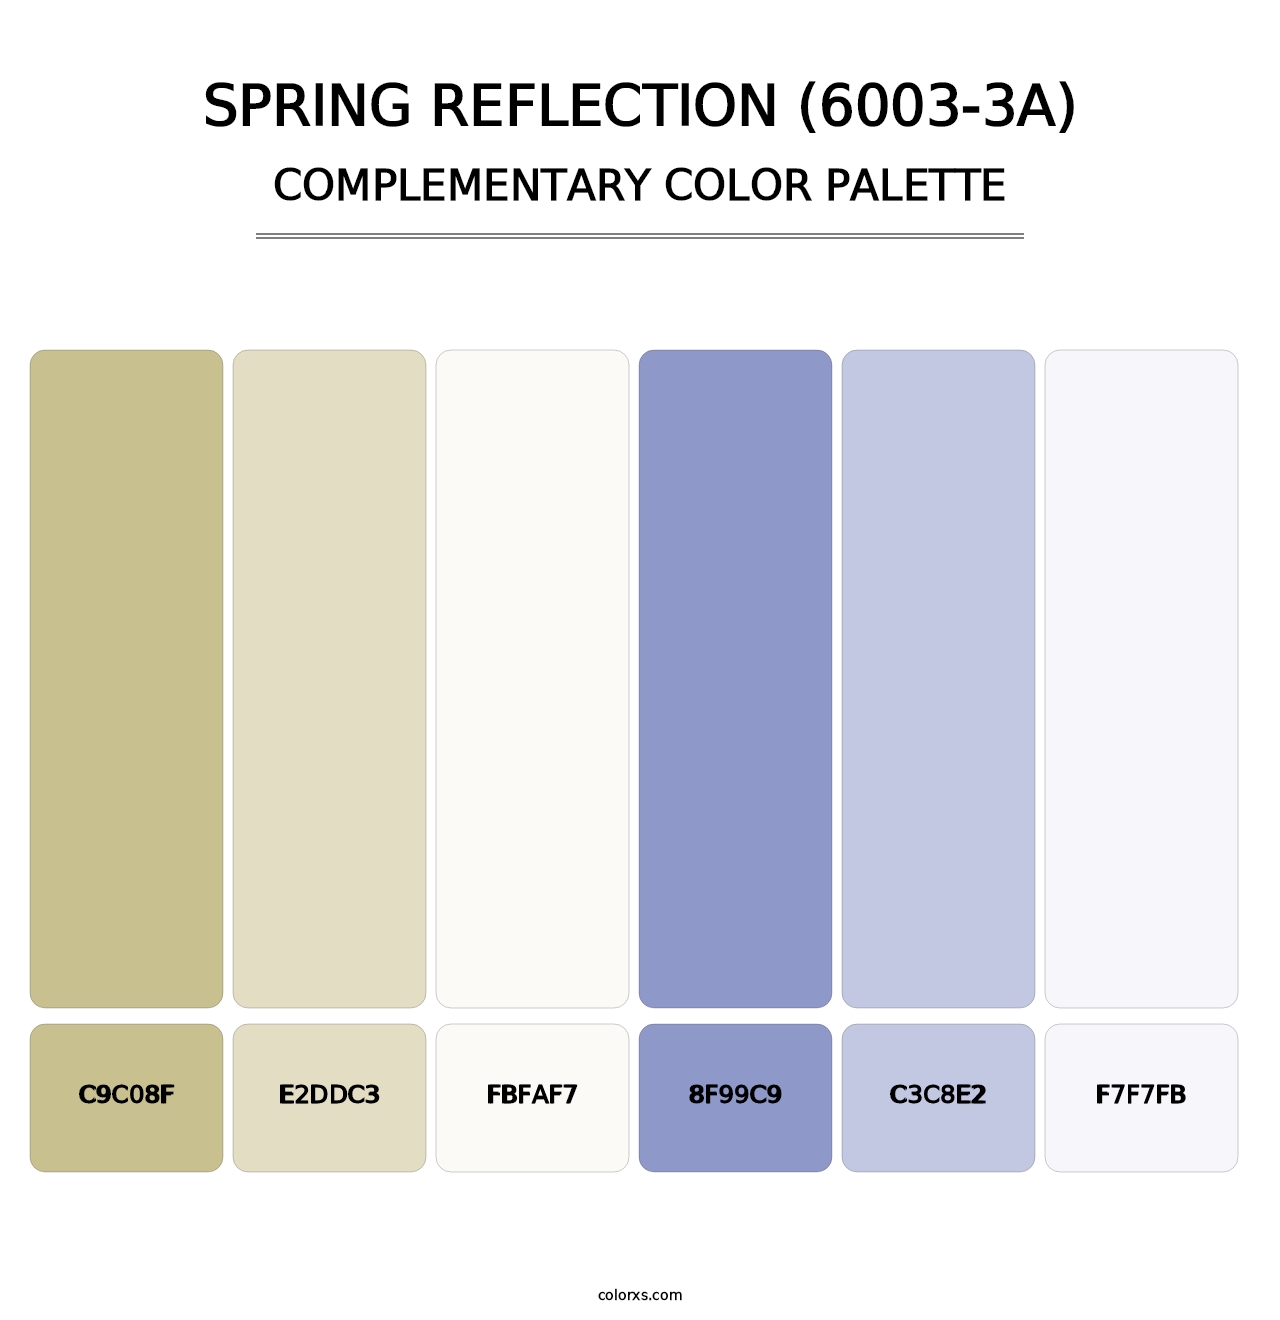 Spring Reflection (6003-3A) - Complementary Color Palette